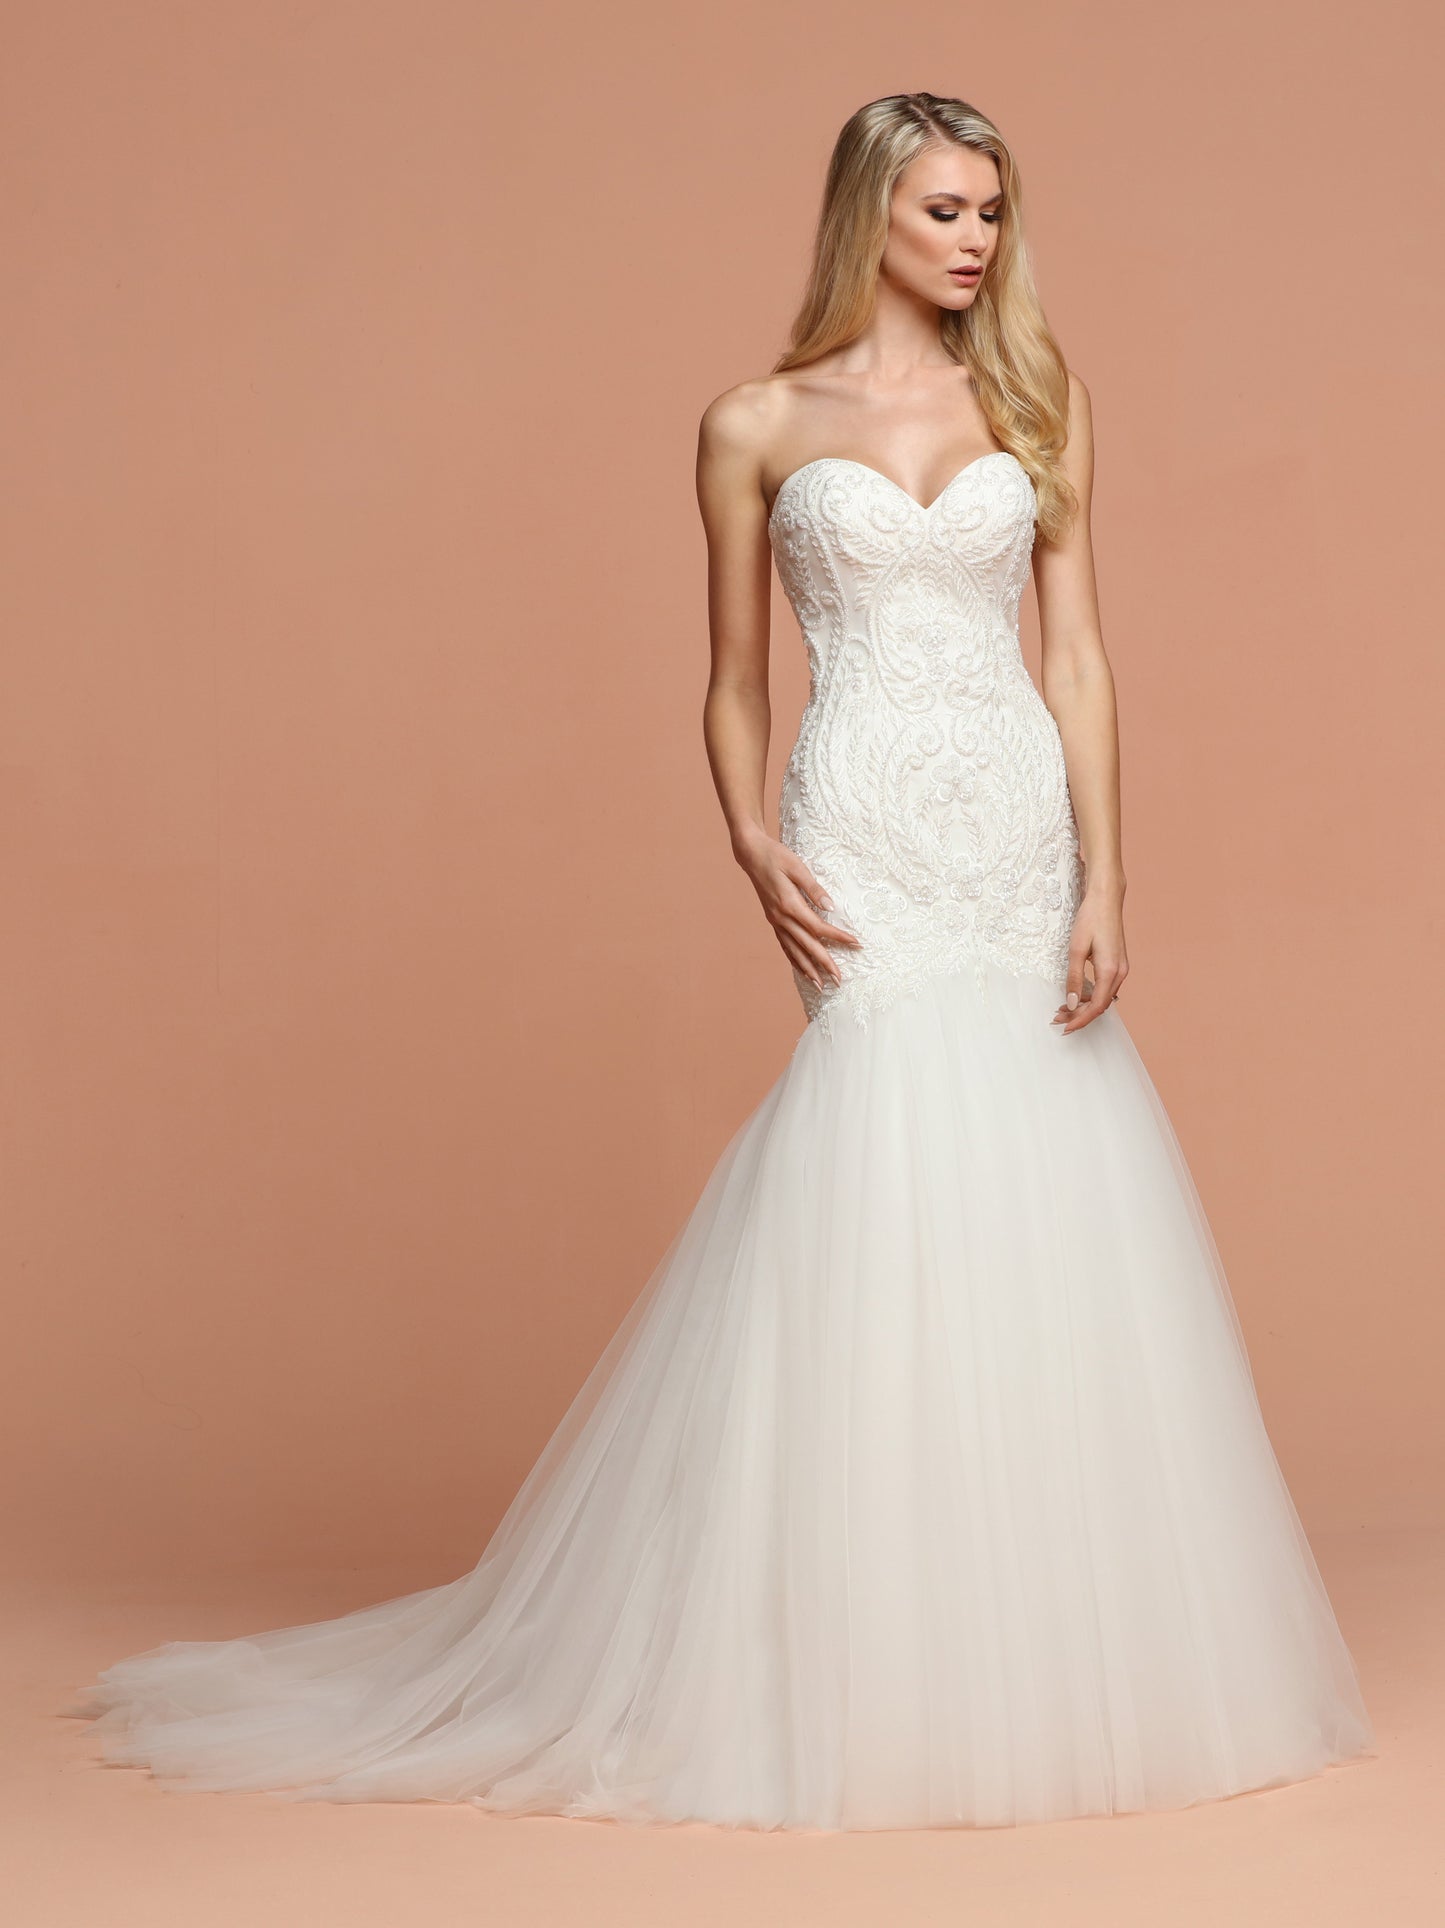 Davinci Bridal 50575 is a Gorgeous Fit & Flare Mermaid Silhouette with a strapless sweetheart neckline. The back features a lace up corset. The Fitted bodice of this gown is hand Embellished with Intricate Beading on lace. The Fulle Tulle Trumpet Skirt has a beautiful train.  Available for 1-2 Week Delivery!!!  Available Sizes: 2,4,6,8,10,12,14,16,18,20  Available Colors: Ivory